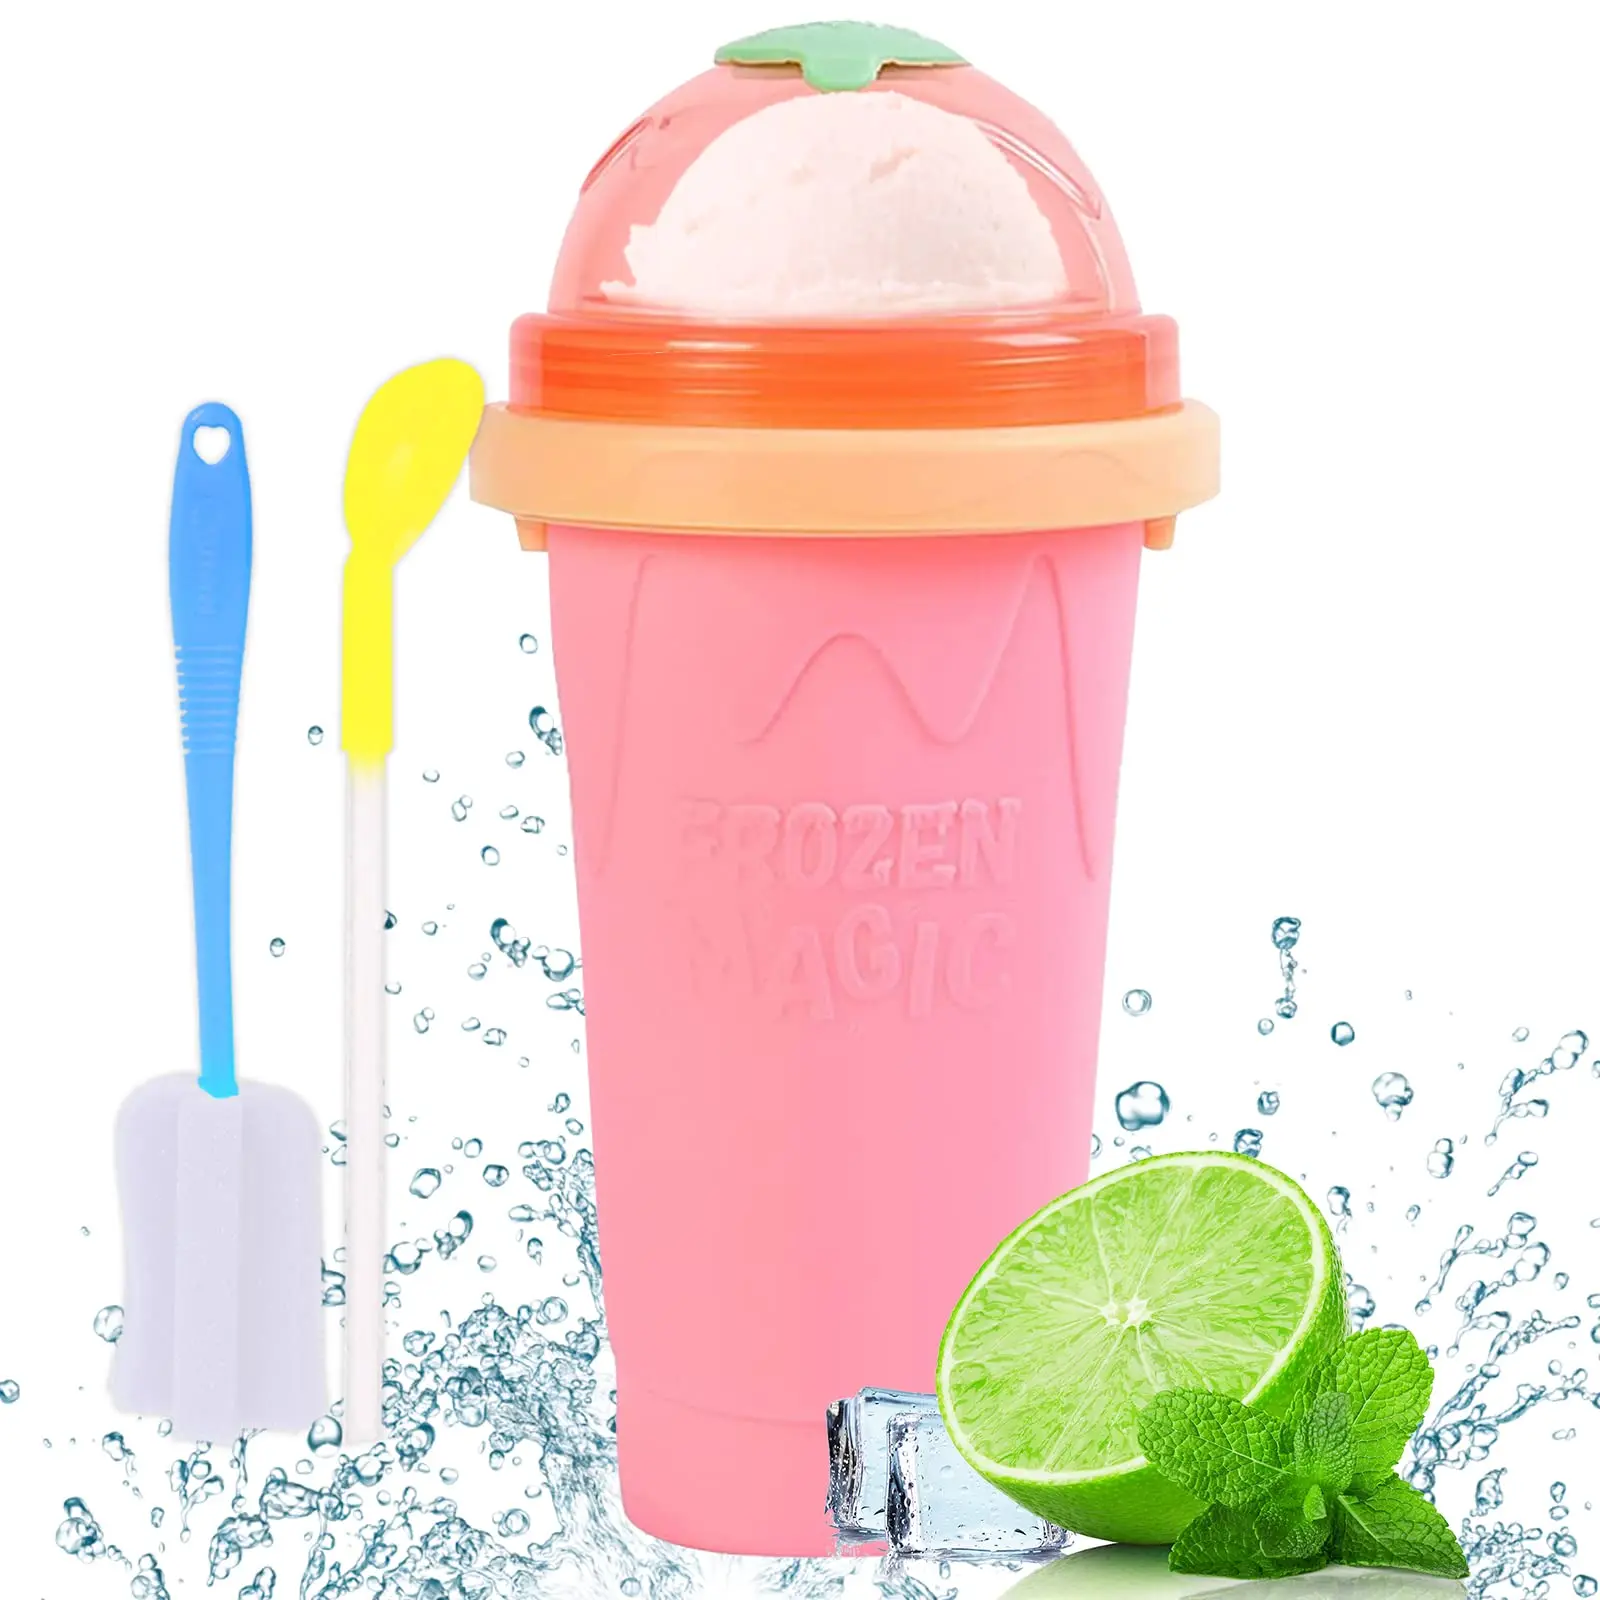 Frozen Magic Slushy Maker Cup,TIK TOK Quick Frozen Smoothies Cup,Slushy  Squeeze Cup Slushie Maker Cup Ice Cup,Cool Stuff Ice Cream Maker for Kids